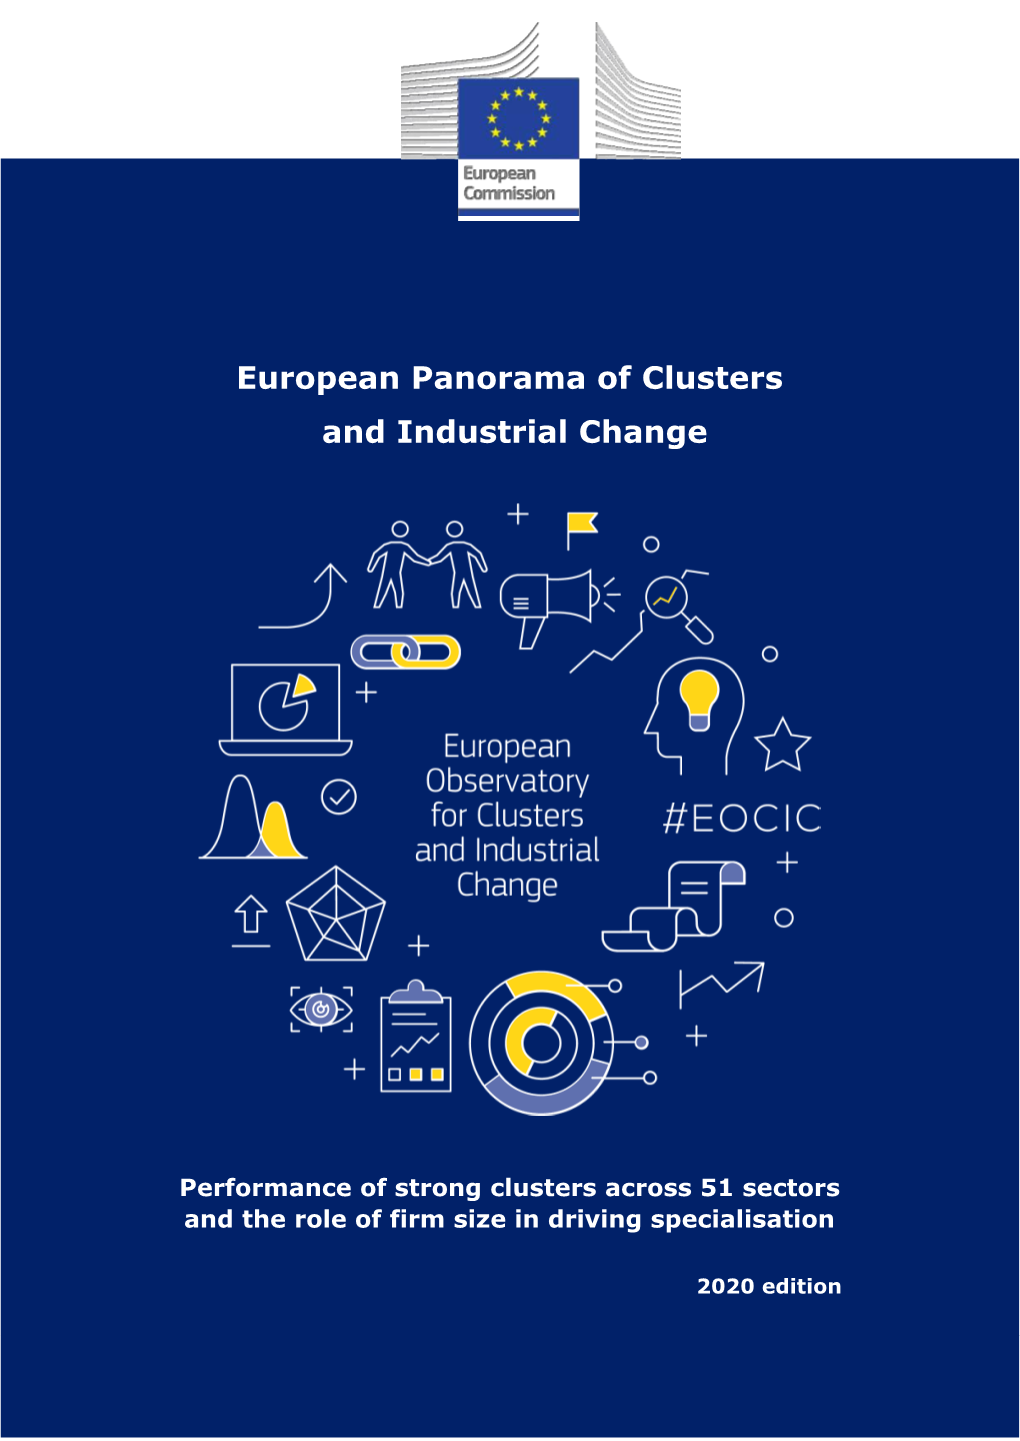 European Panorama of Clusters and Industrial Change